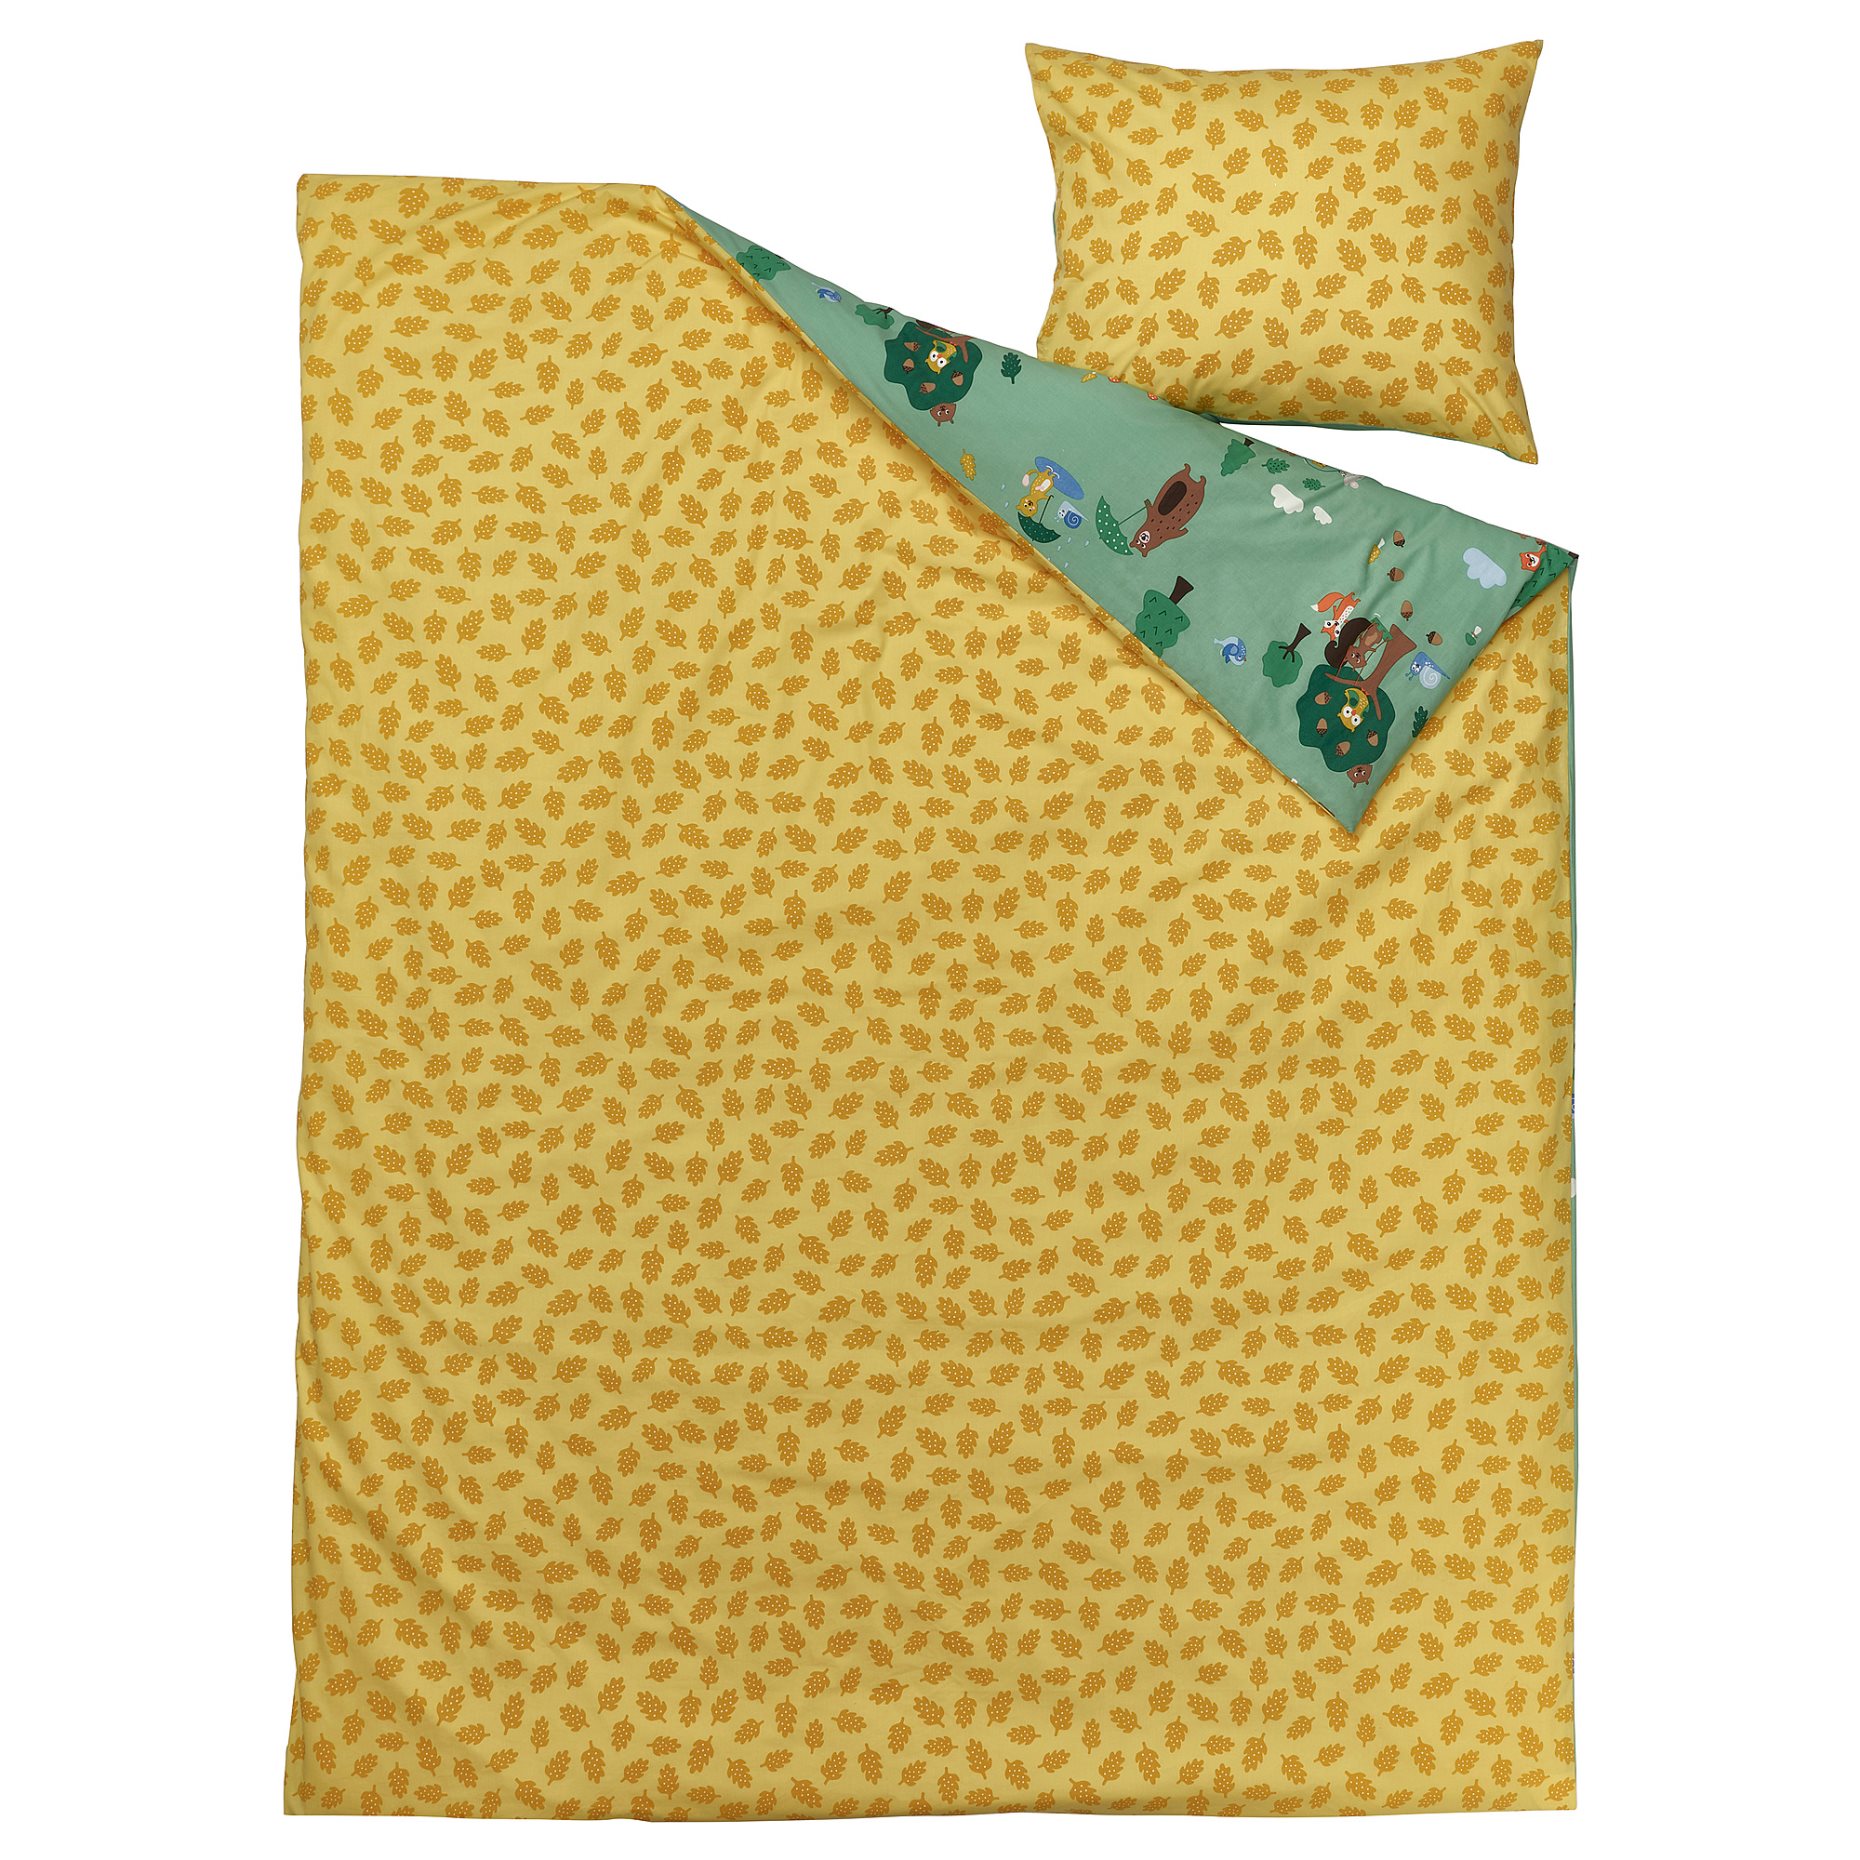 BRUMMIG, duvet cover and pillowcase/forest animal pattern, 150x200/50x60 cm, 505.211.54